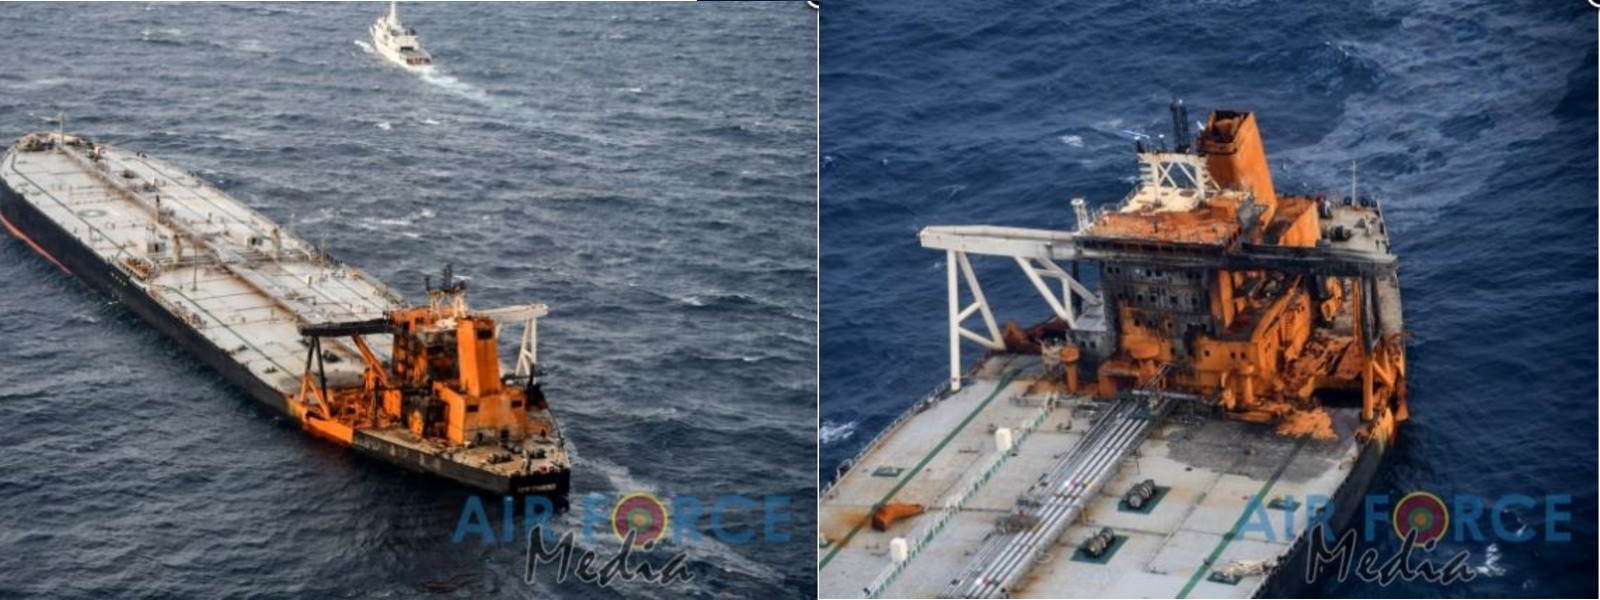 Oil slick from MT New Diamond located 02 nautical miles close to distressed tanker